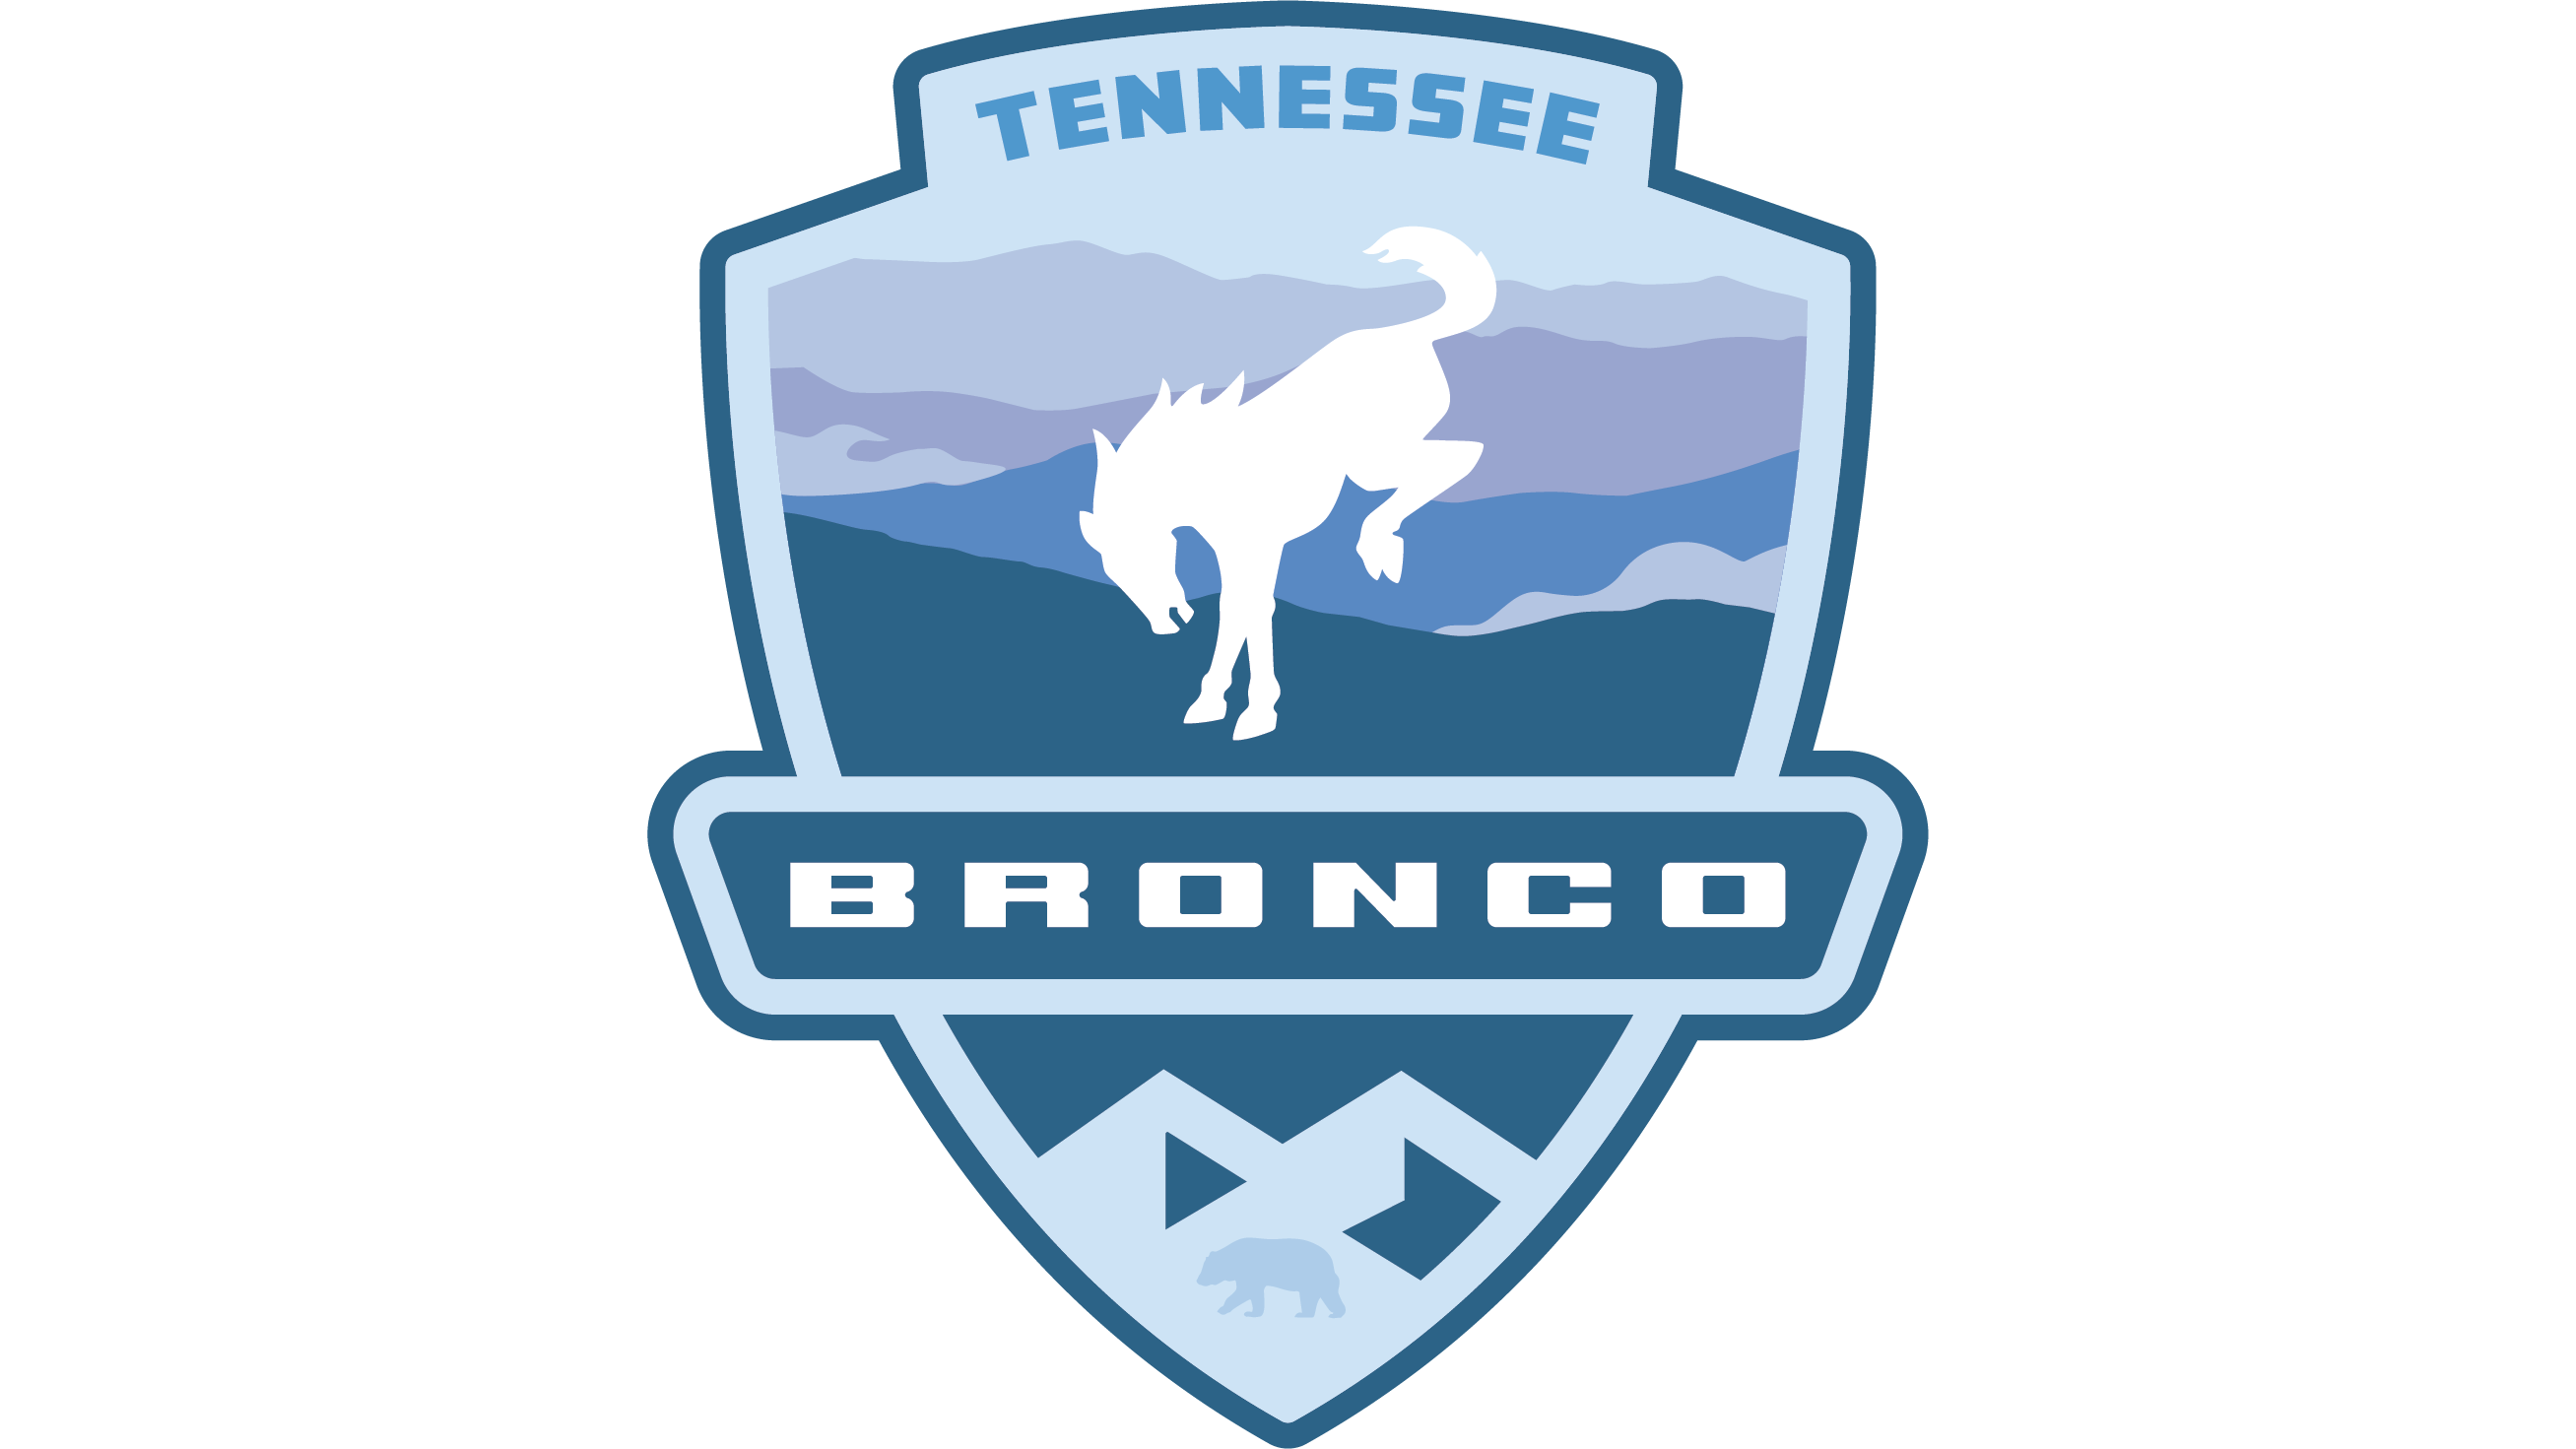 Tennessee Bronco